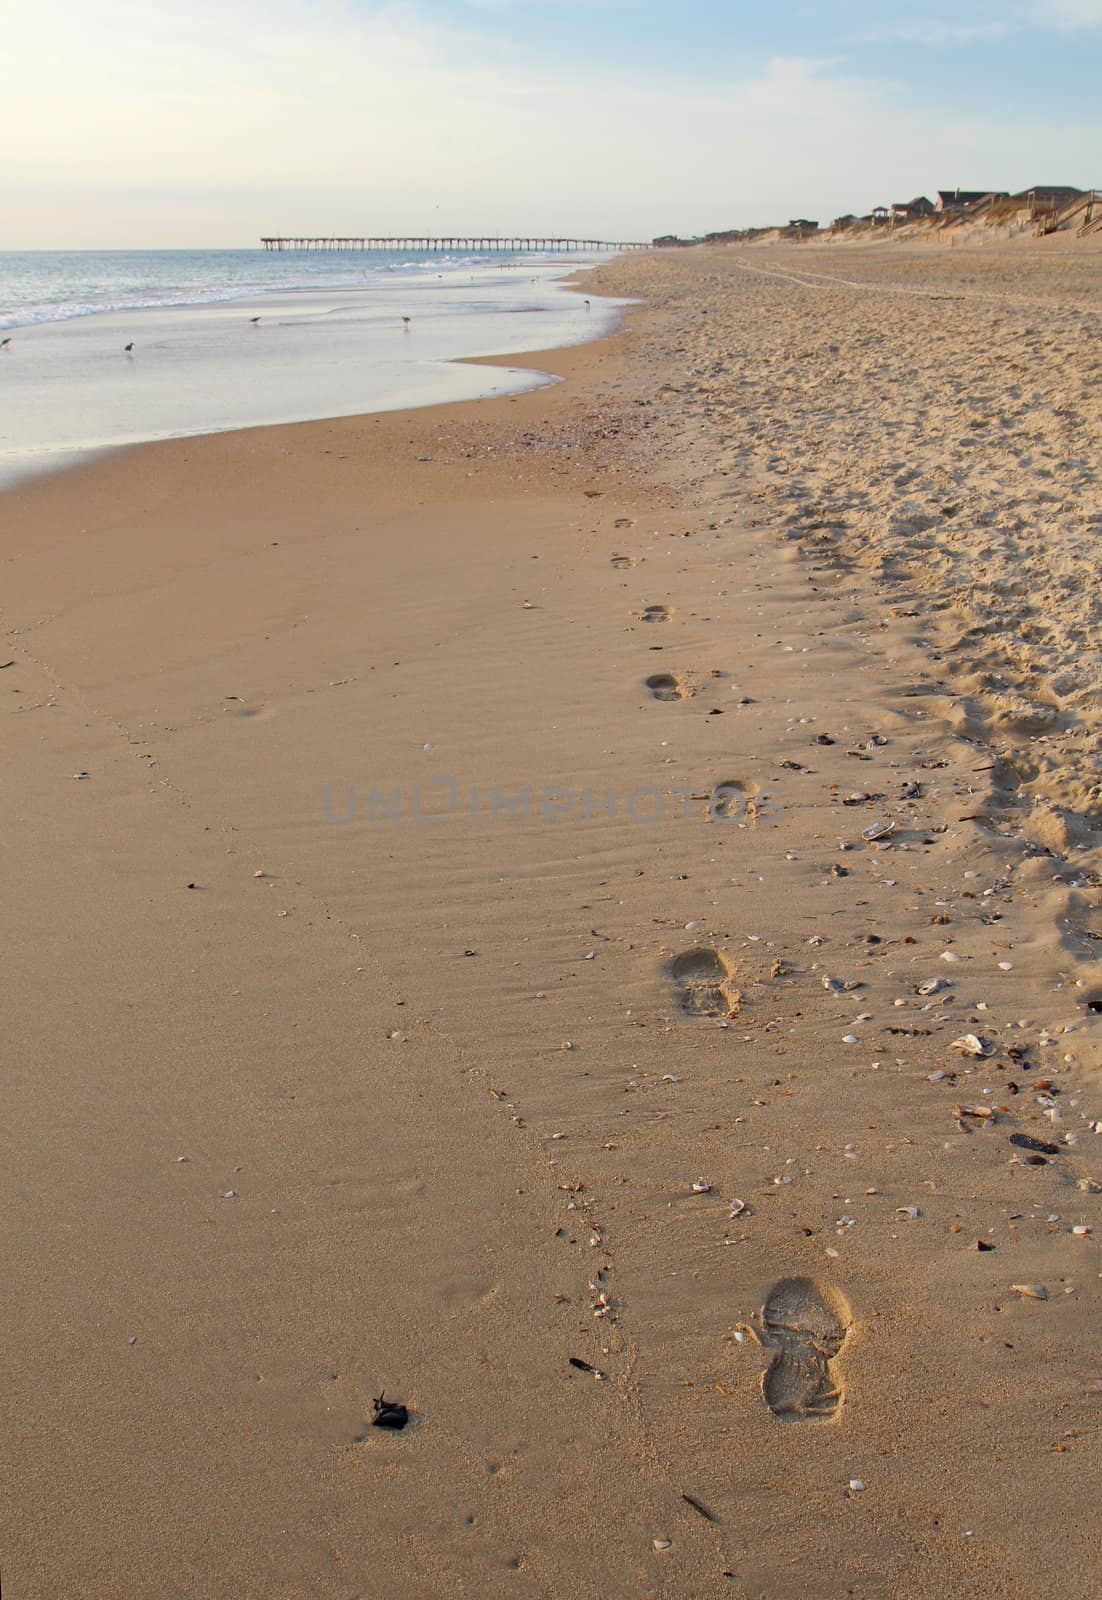 Footsteps on a beach in North Carolina vertical by sgoodwin4813